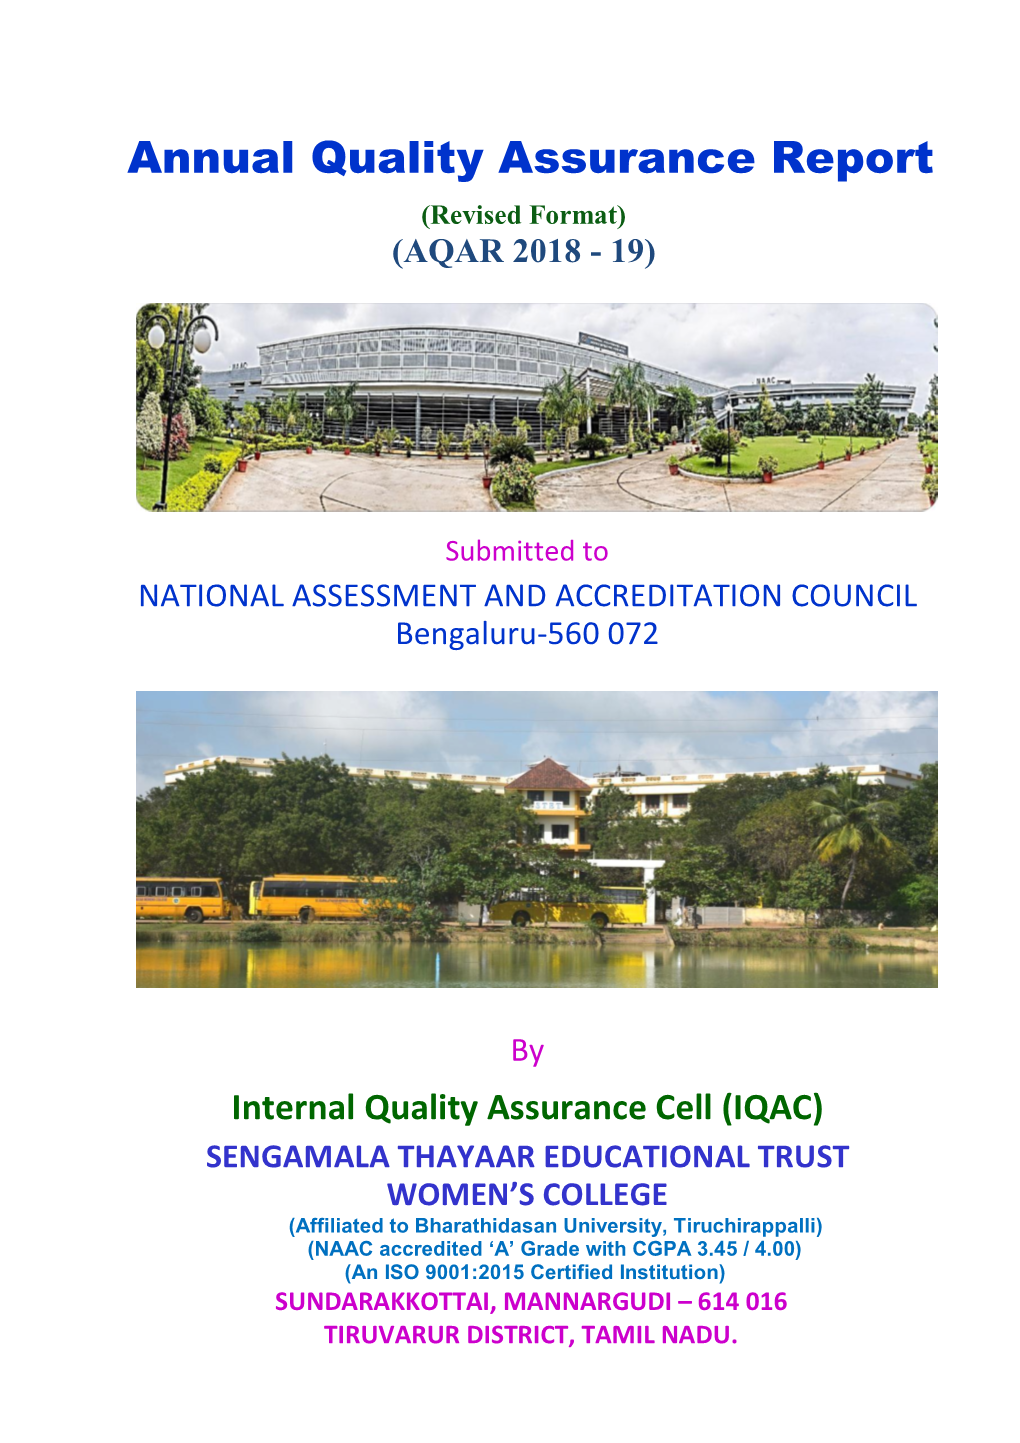 4. Annual Quality Assurance Report